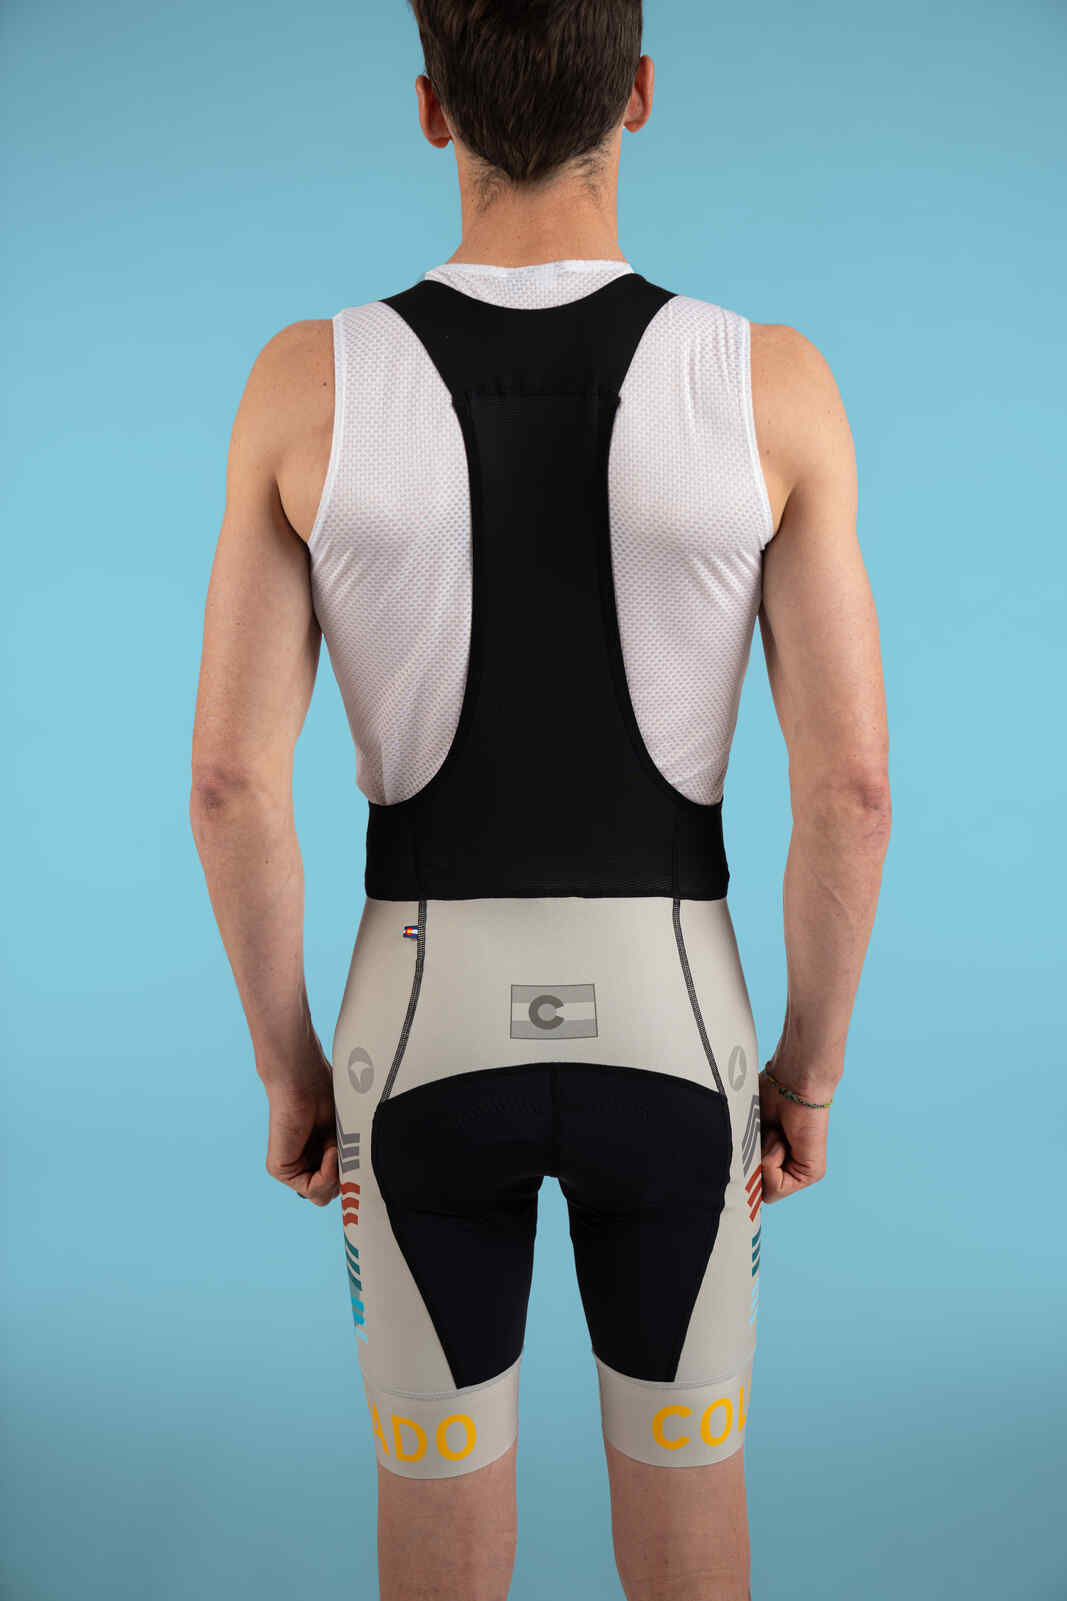 Men's White Colorado Cycling Bibs - Back Uppers